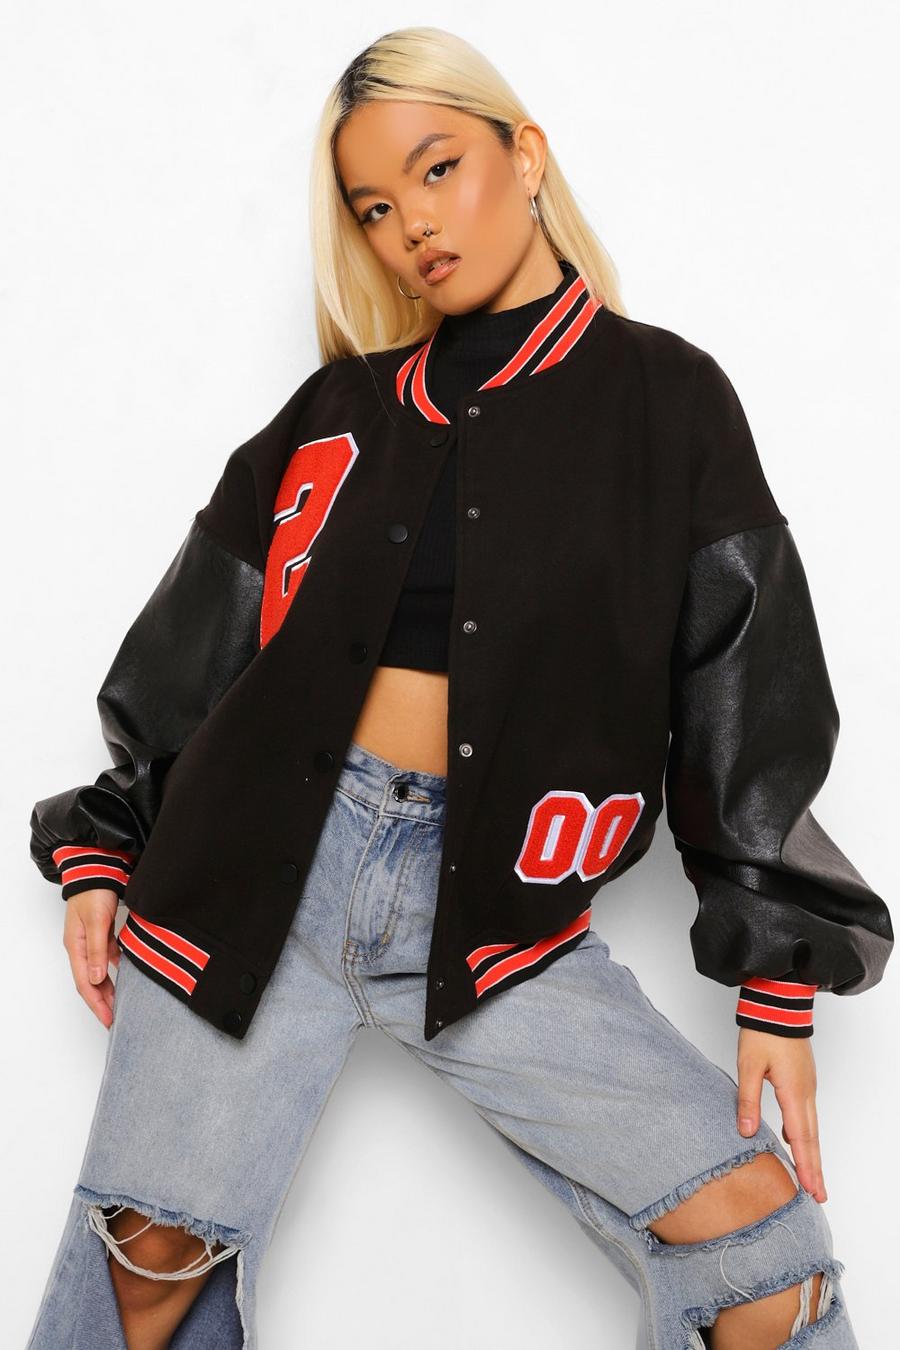 Oversized Varsity Jacket Outfit Ideas That Will Make You Stand Out this ...